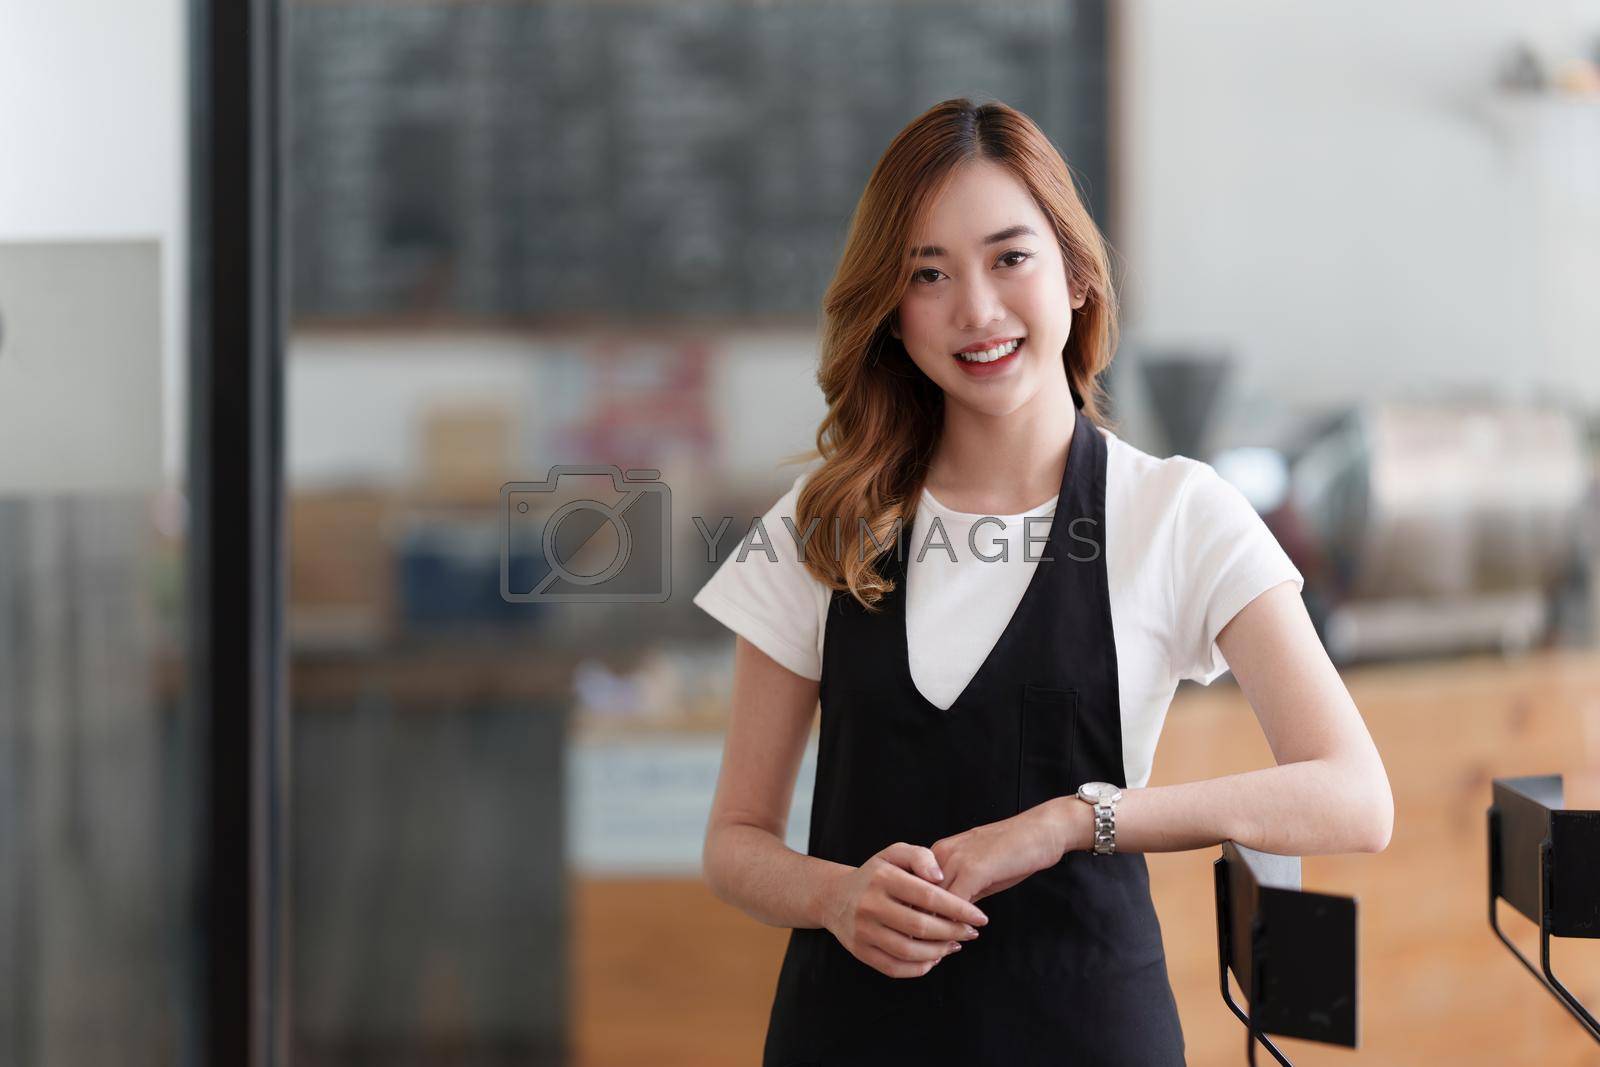 Royalty free image of Beautiful Asian women Barista smiling at her cafe waiting for customer by itchaznong